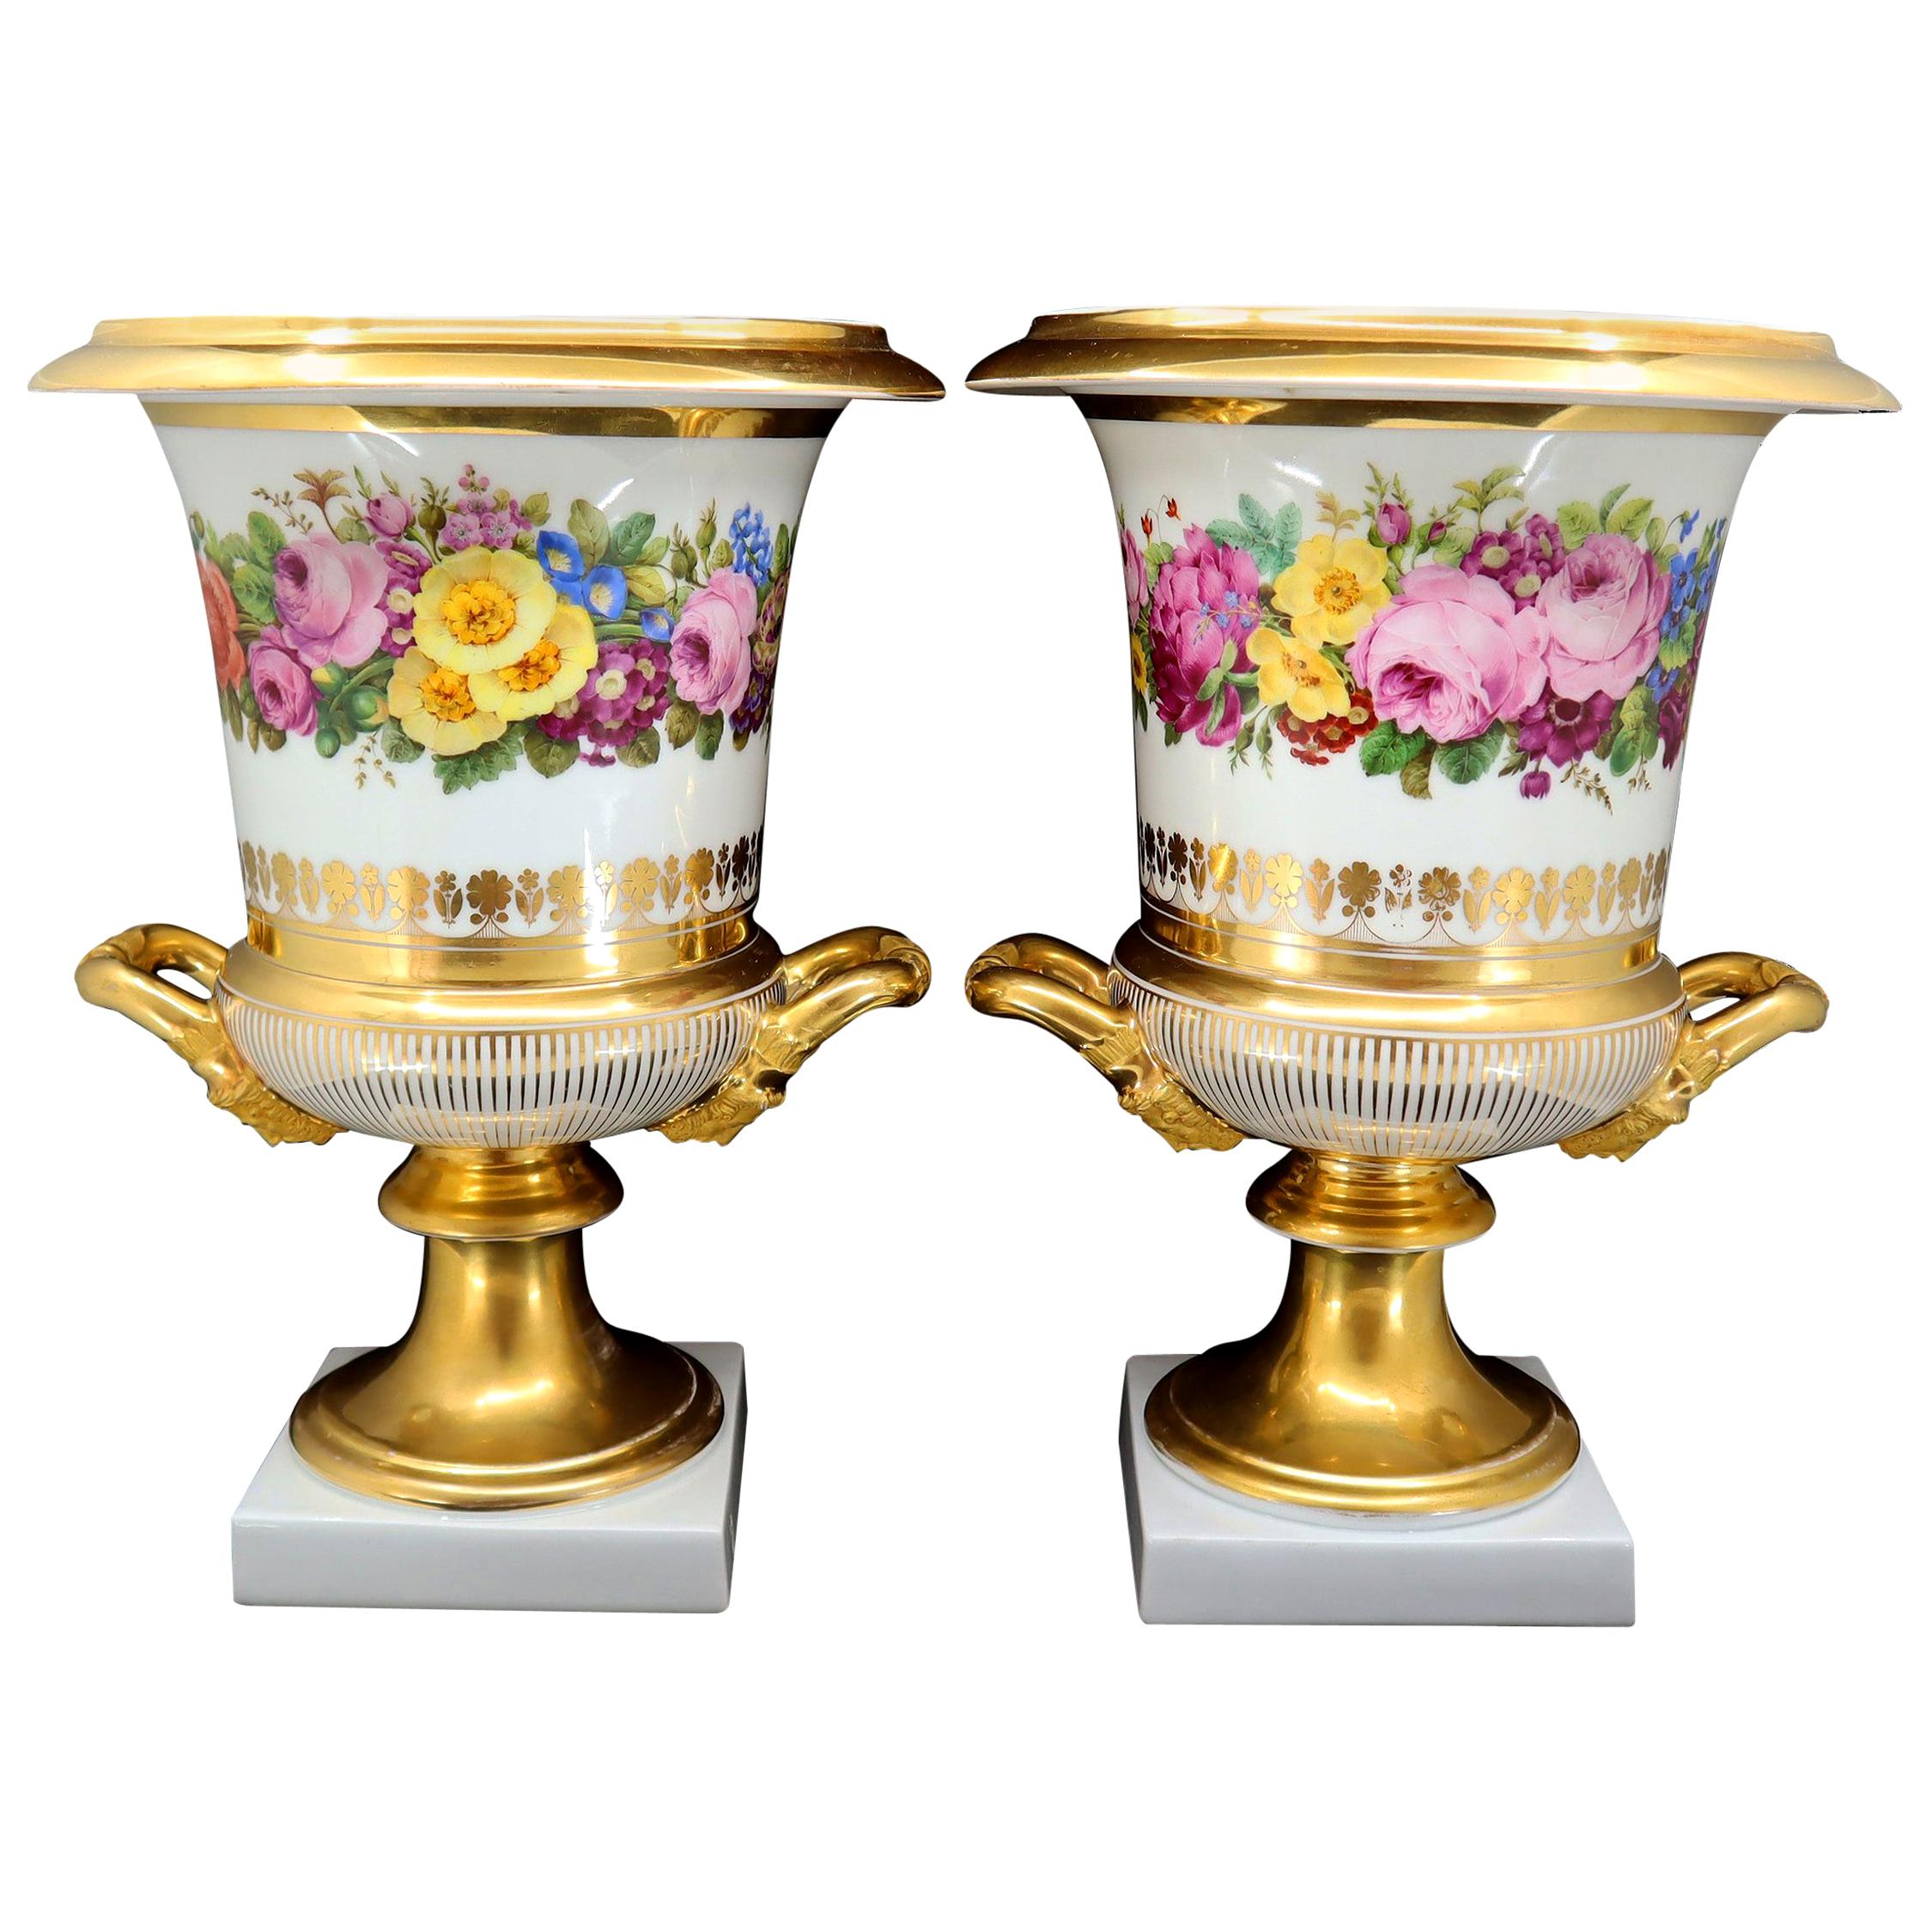 Pair of 19th Century Medici Vases, Hand-Painted Porcelain